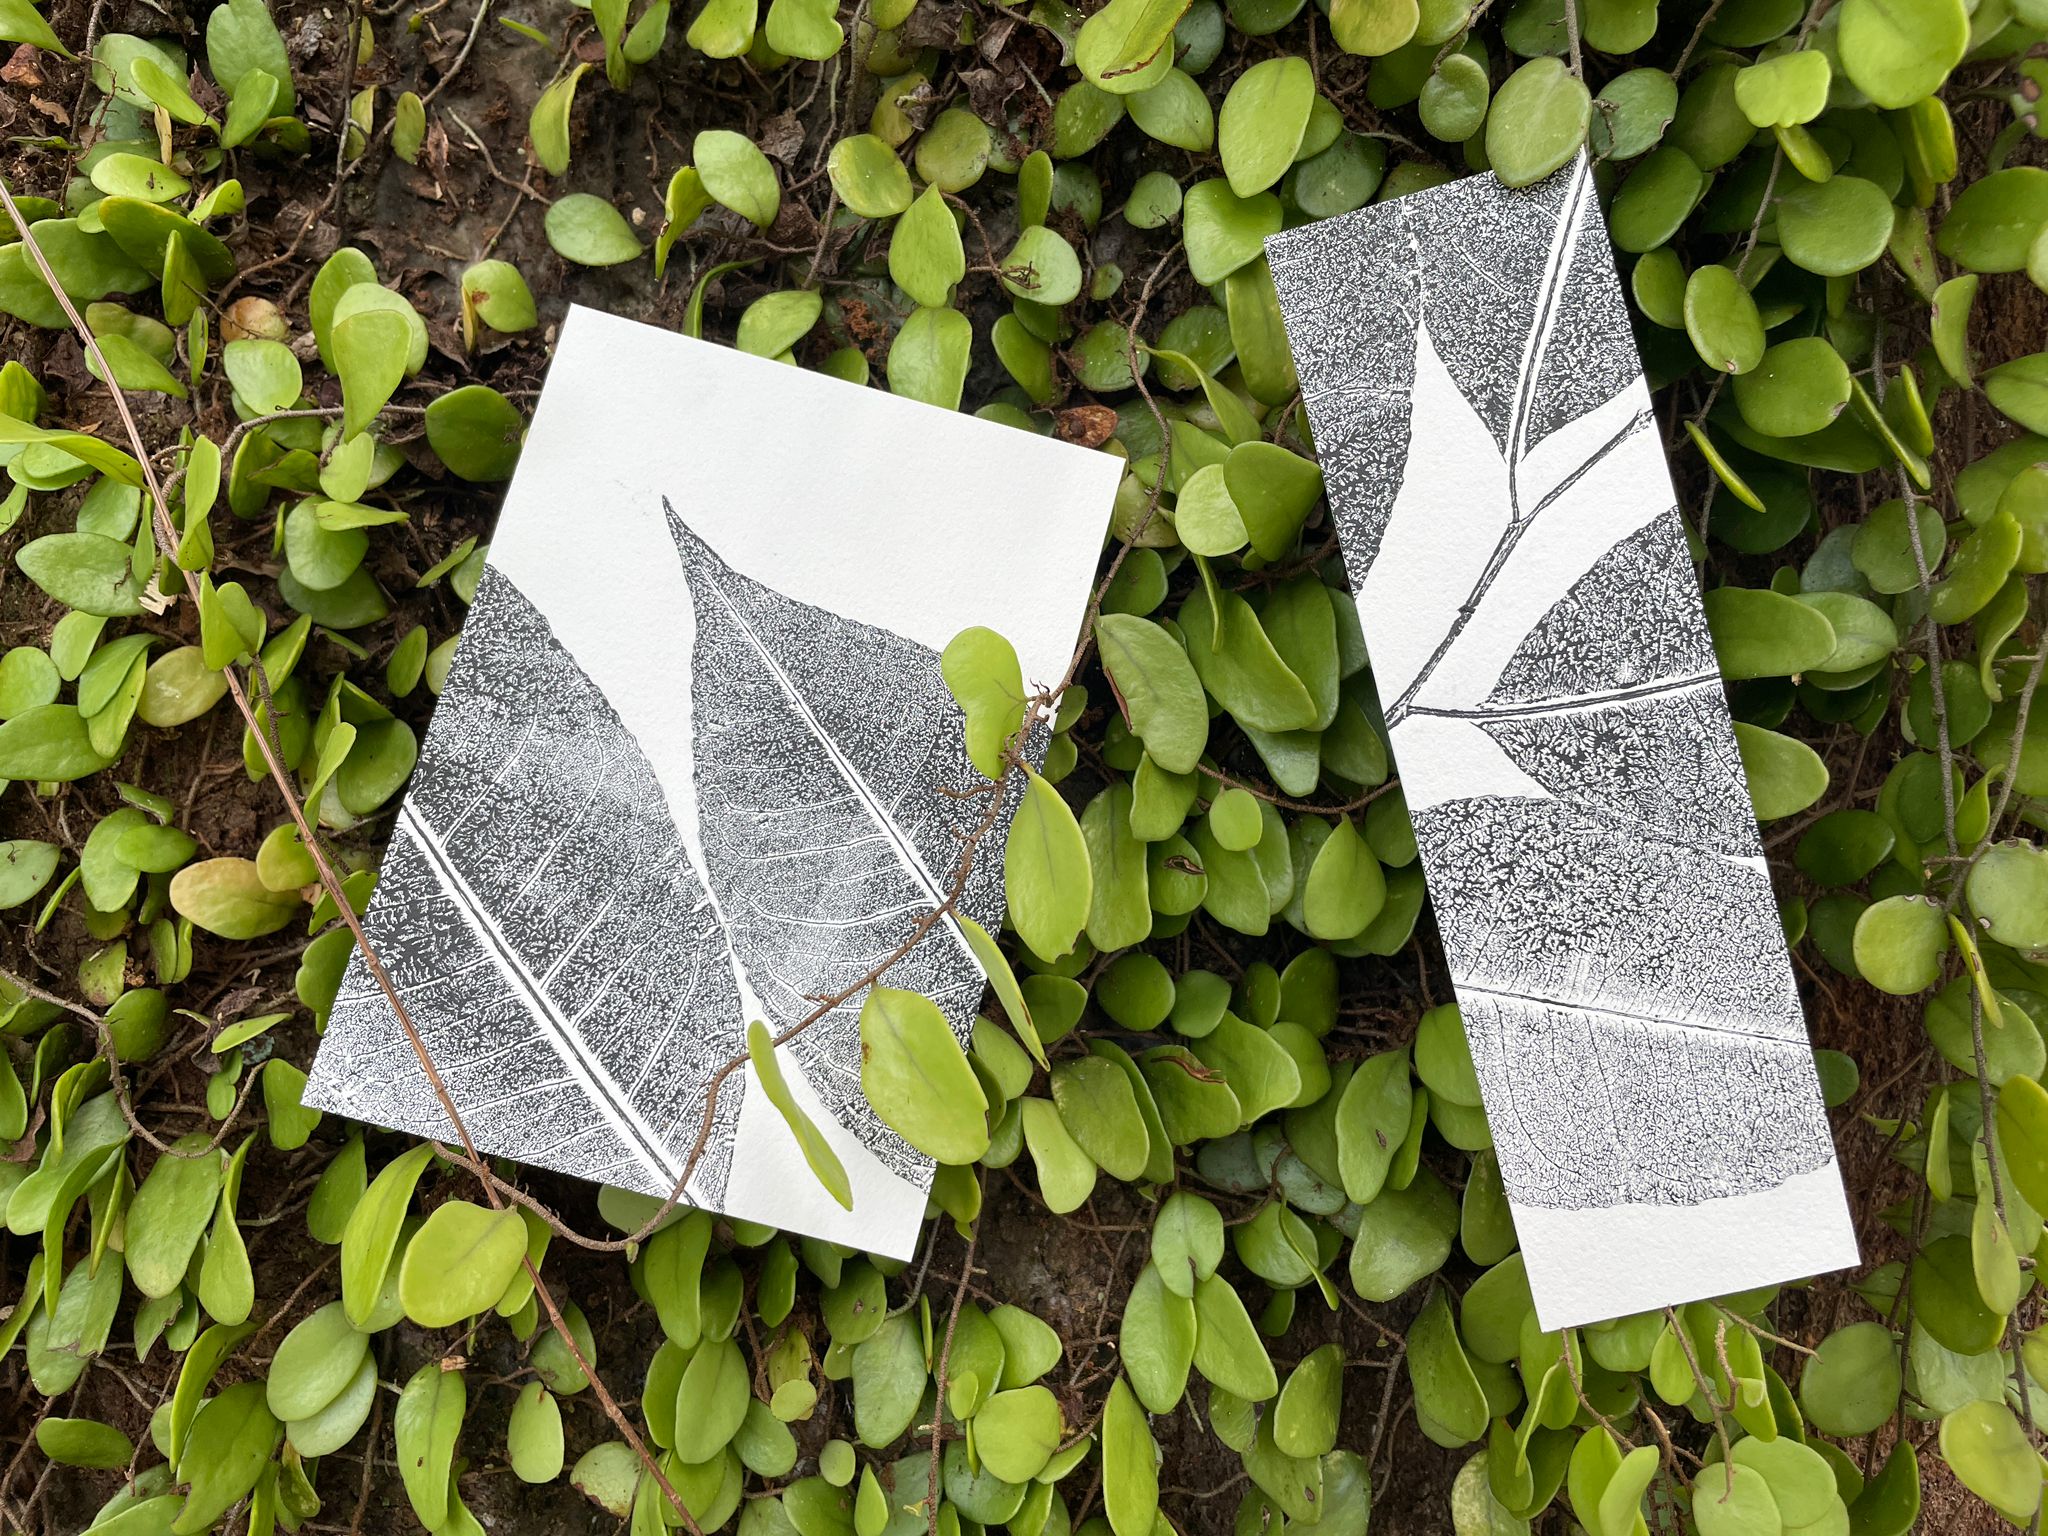 Make Your Own Nature Print!